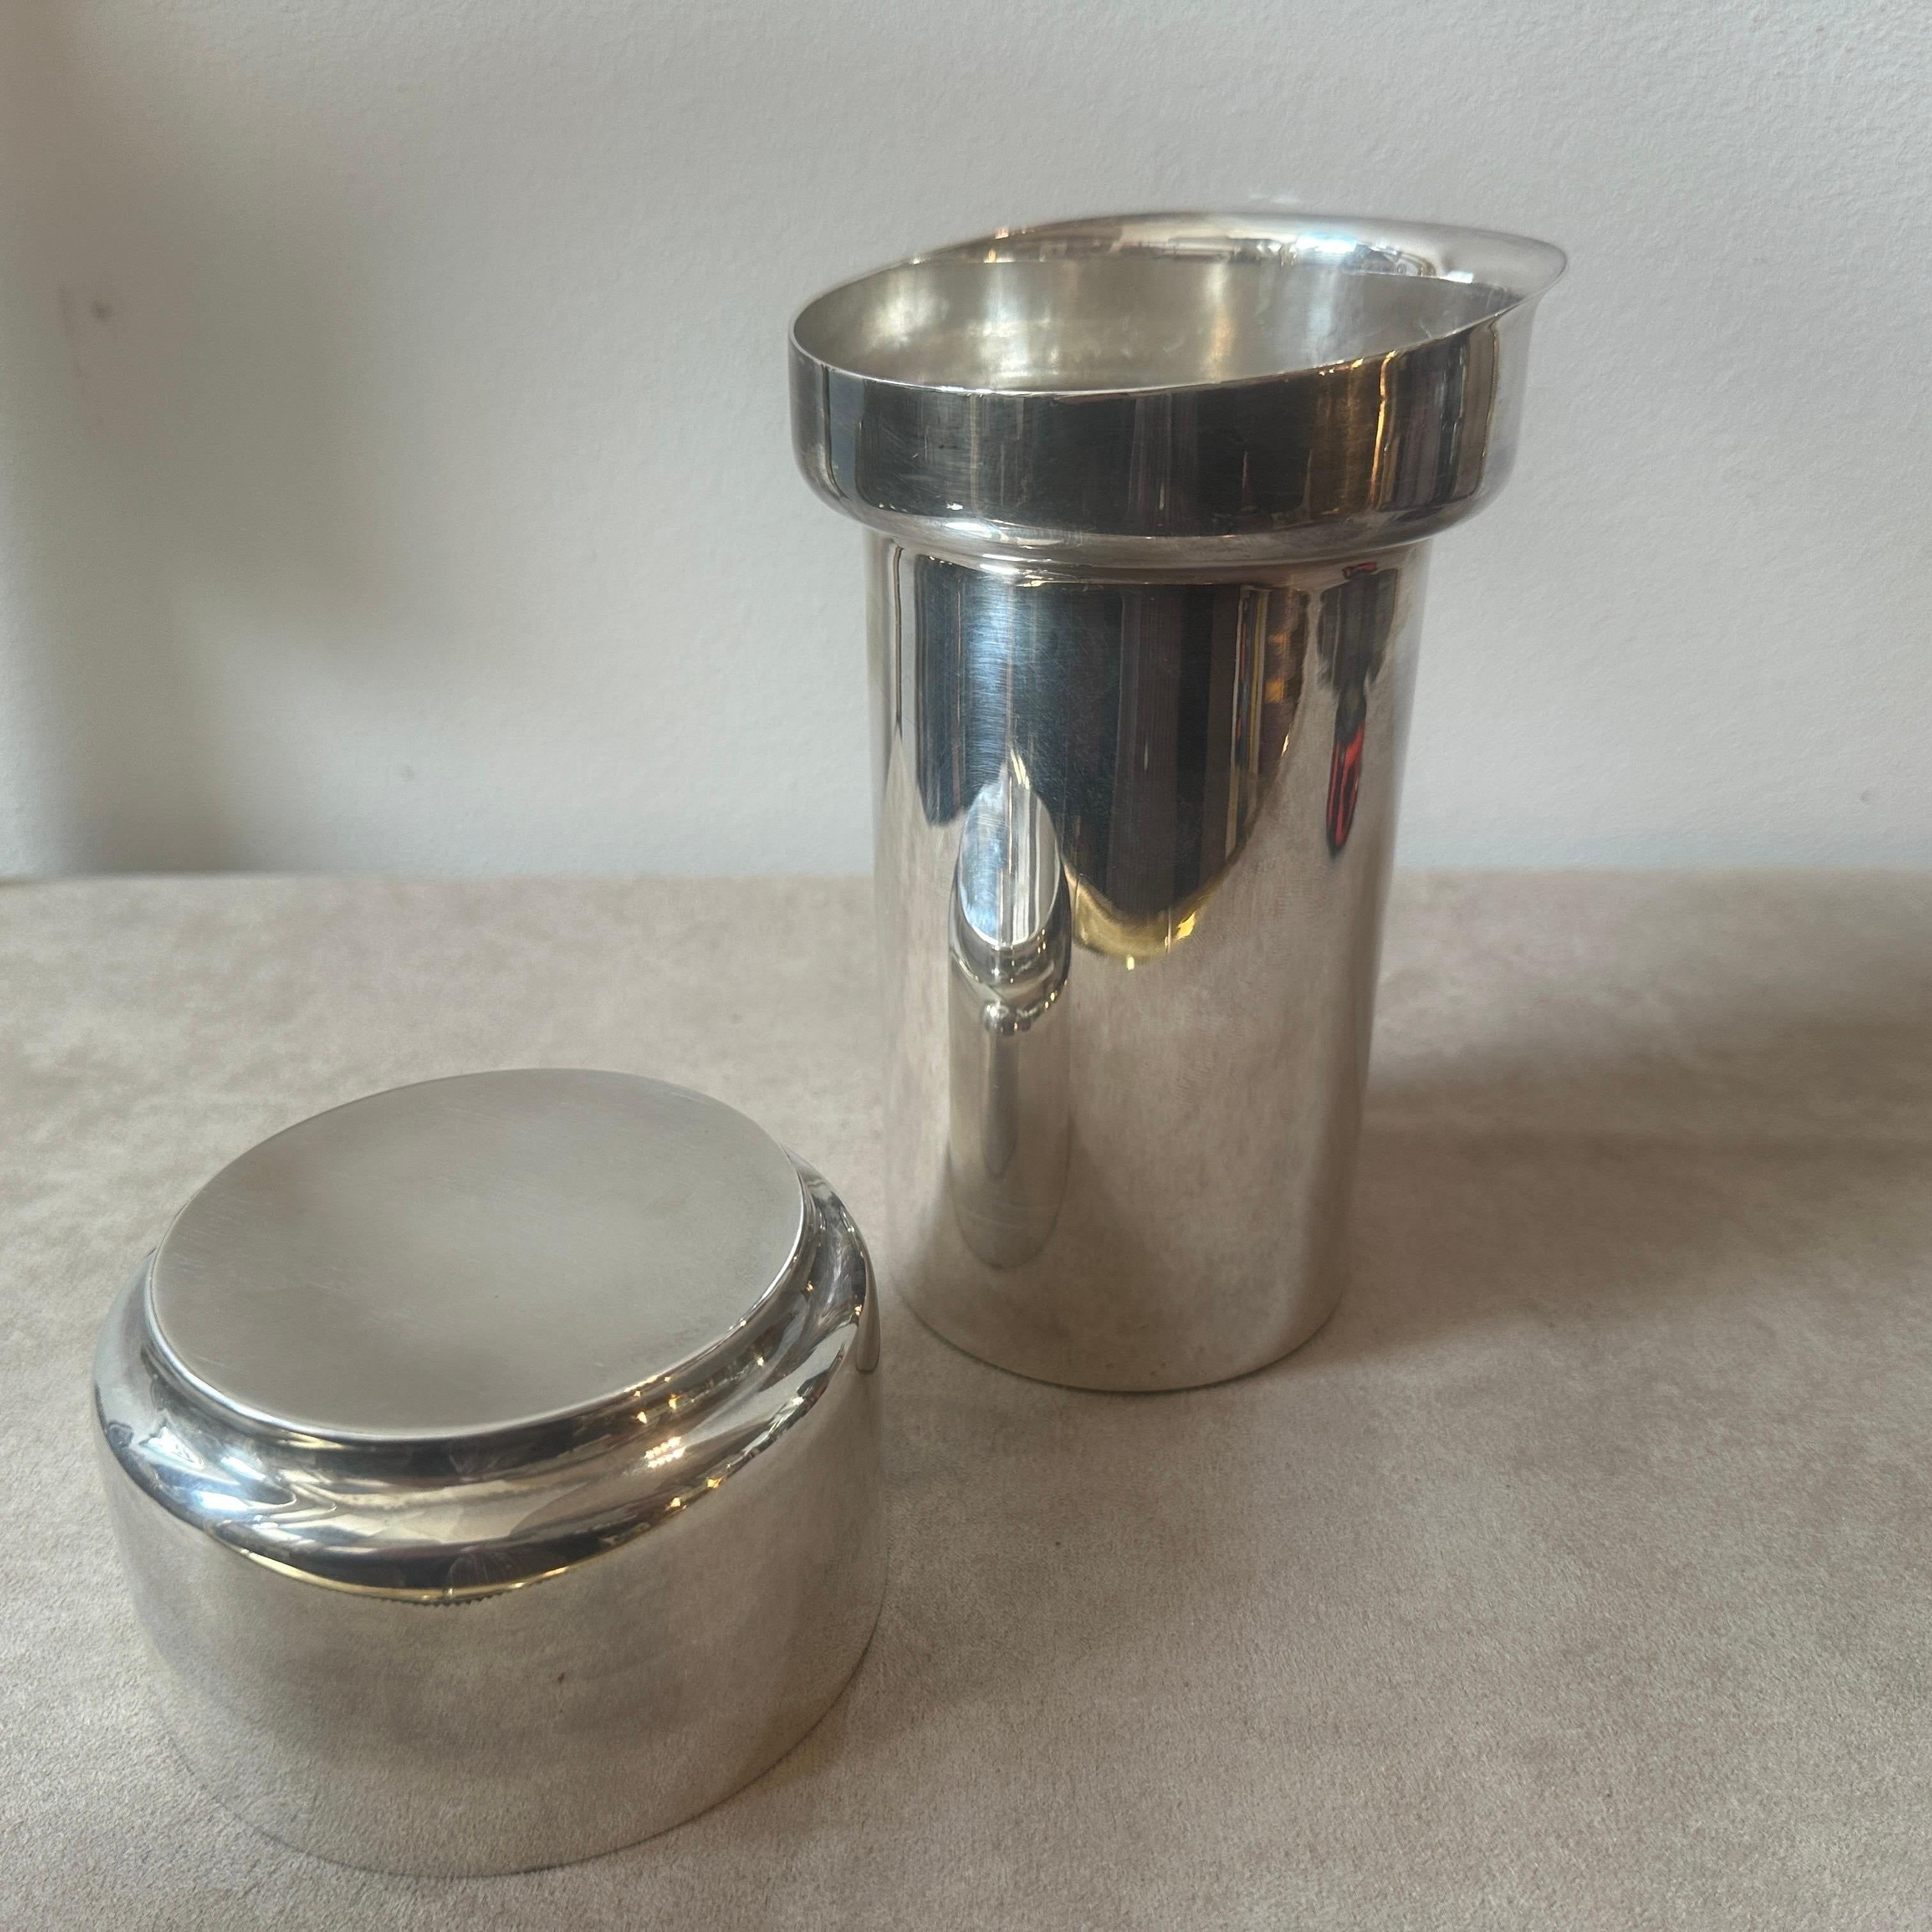 A 1980s Modernist Silver Plated Italian Cocktail Shaker by Lino Sabattini In Good Condition For Sale In Aci Castello, IT